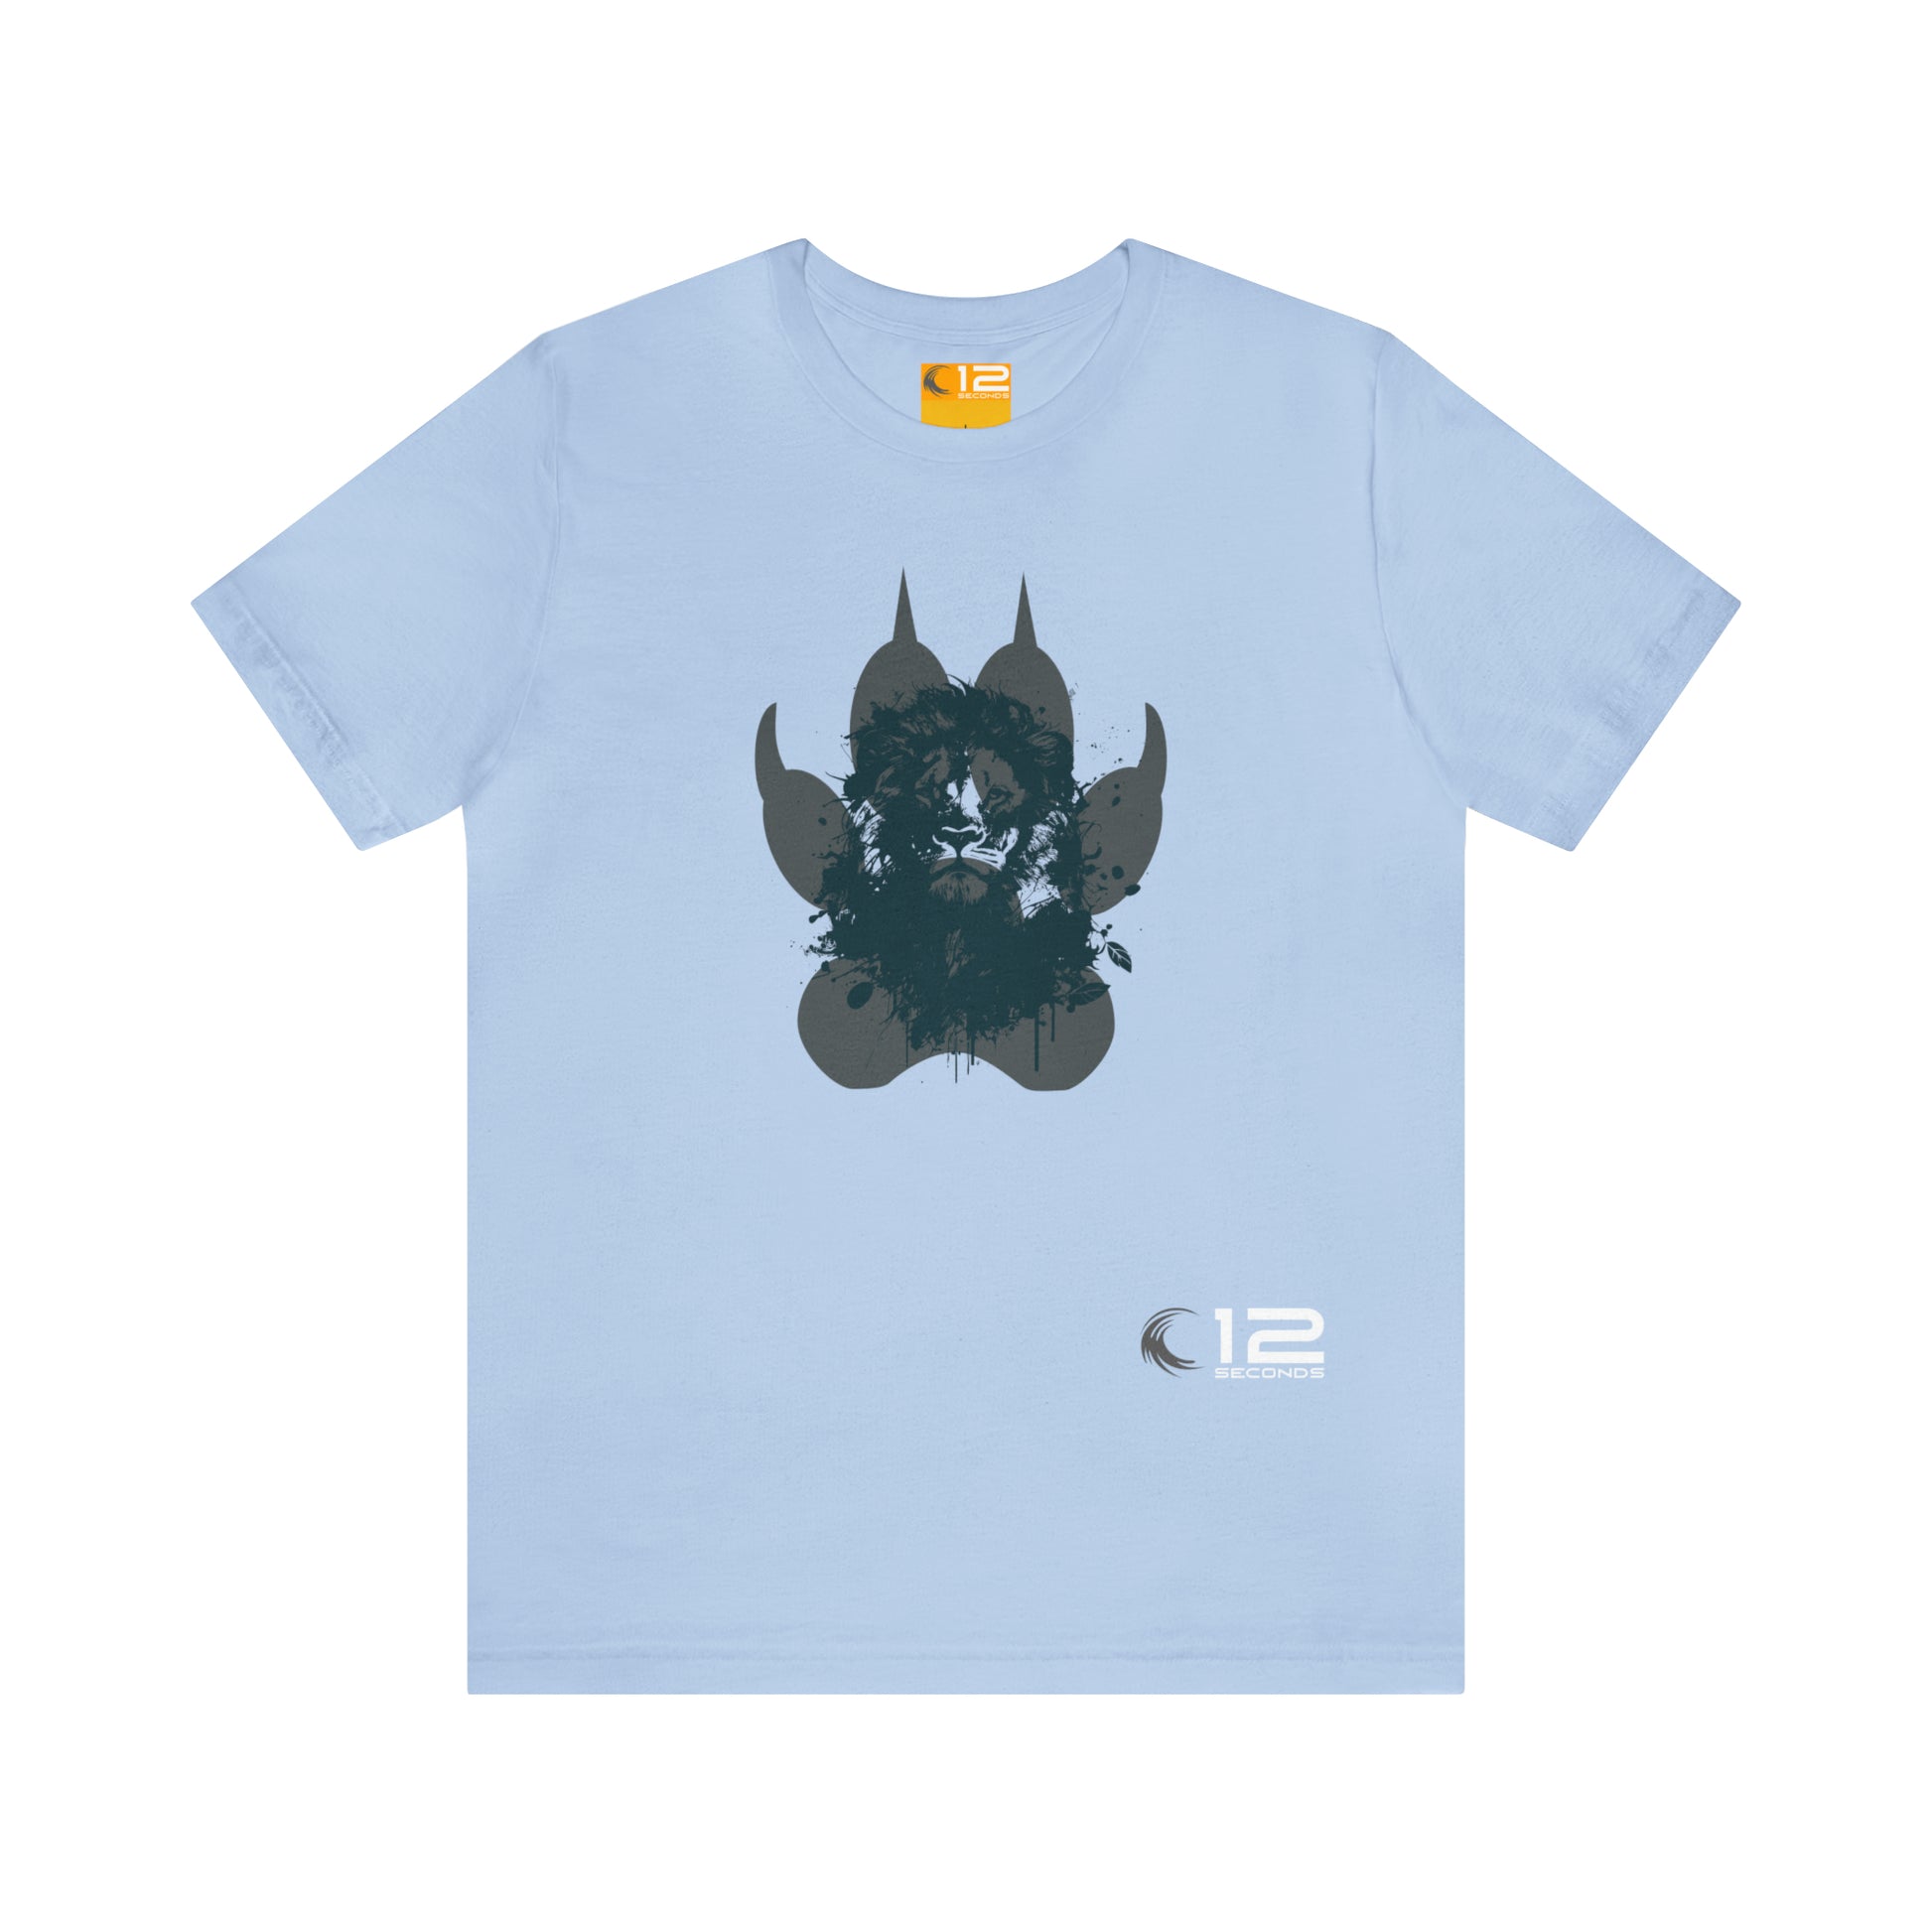 Jersey Short Sleeve Tee - LION PAW - 12 SECONDS APPAREL